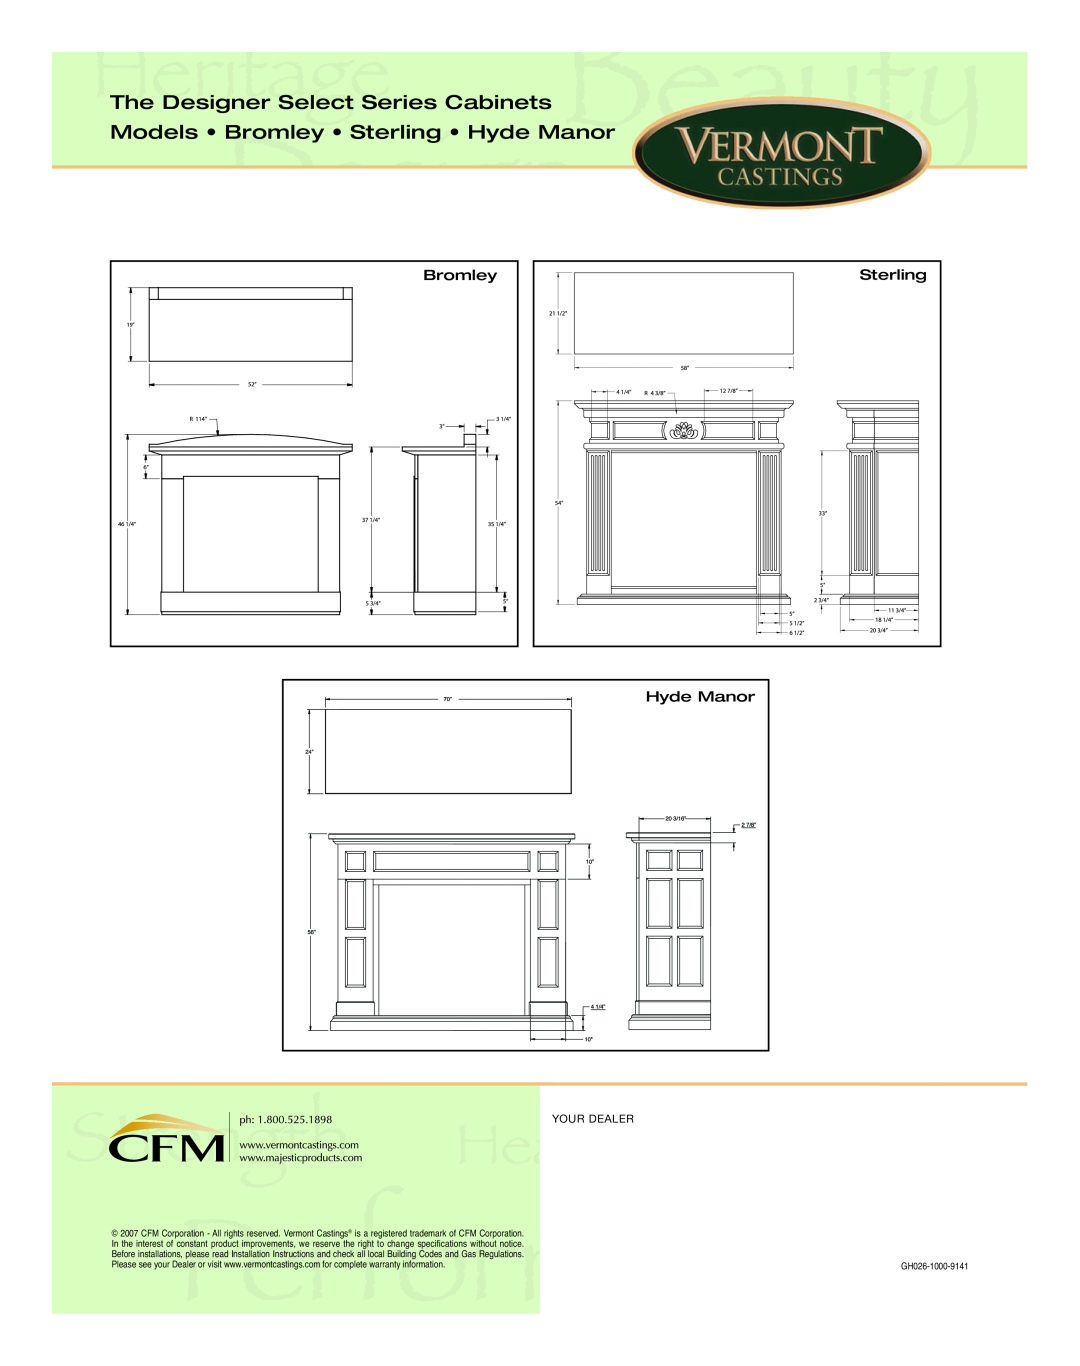 Vermont Casting The Designer Select Series Cabinets, Models Bromley Sterling Hyde Manor, Your Dealer, GH026-1000-9141 